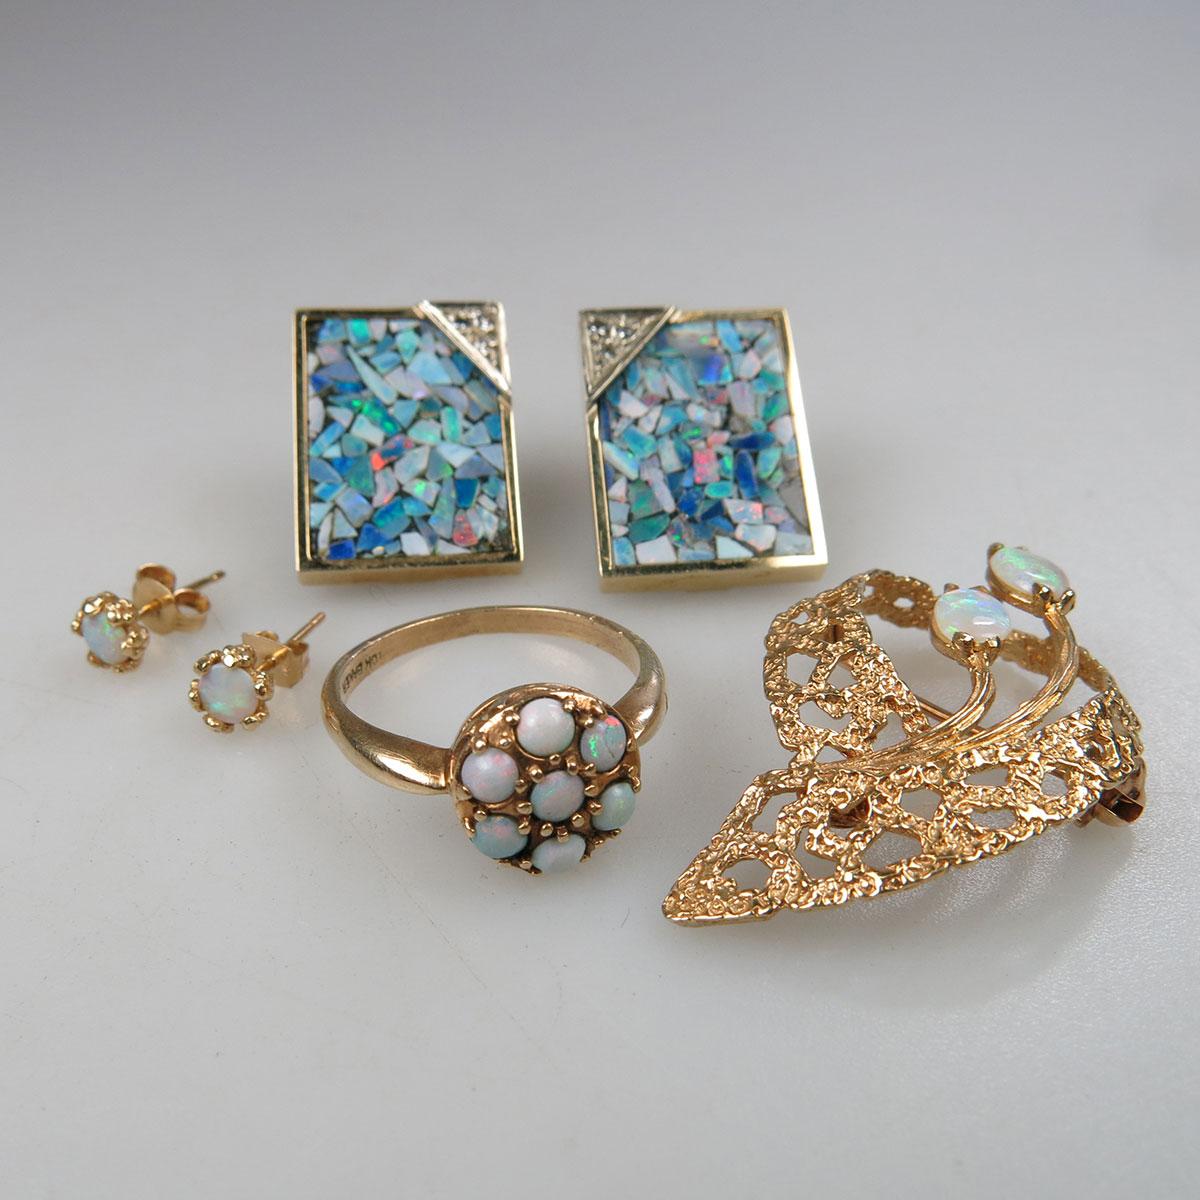 Two Pairs Of 14k Yellow Gold Earrings, a 14k Yellow Gold Brooch, And a 10k Yellow Gold Ring